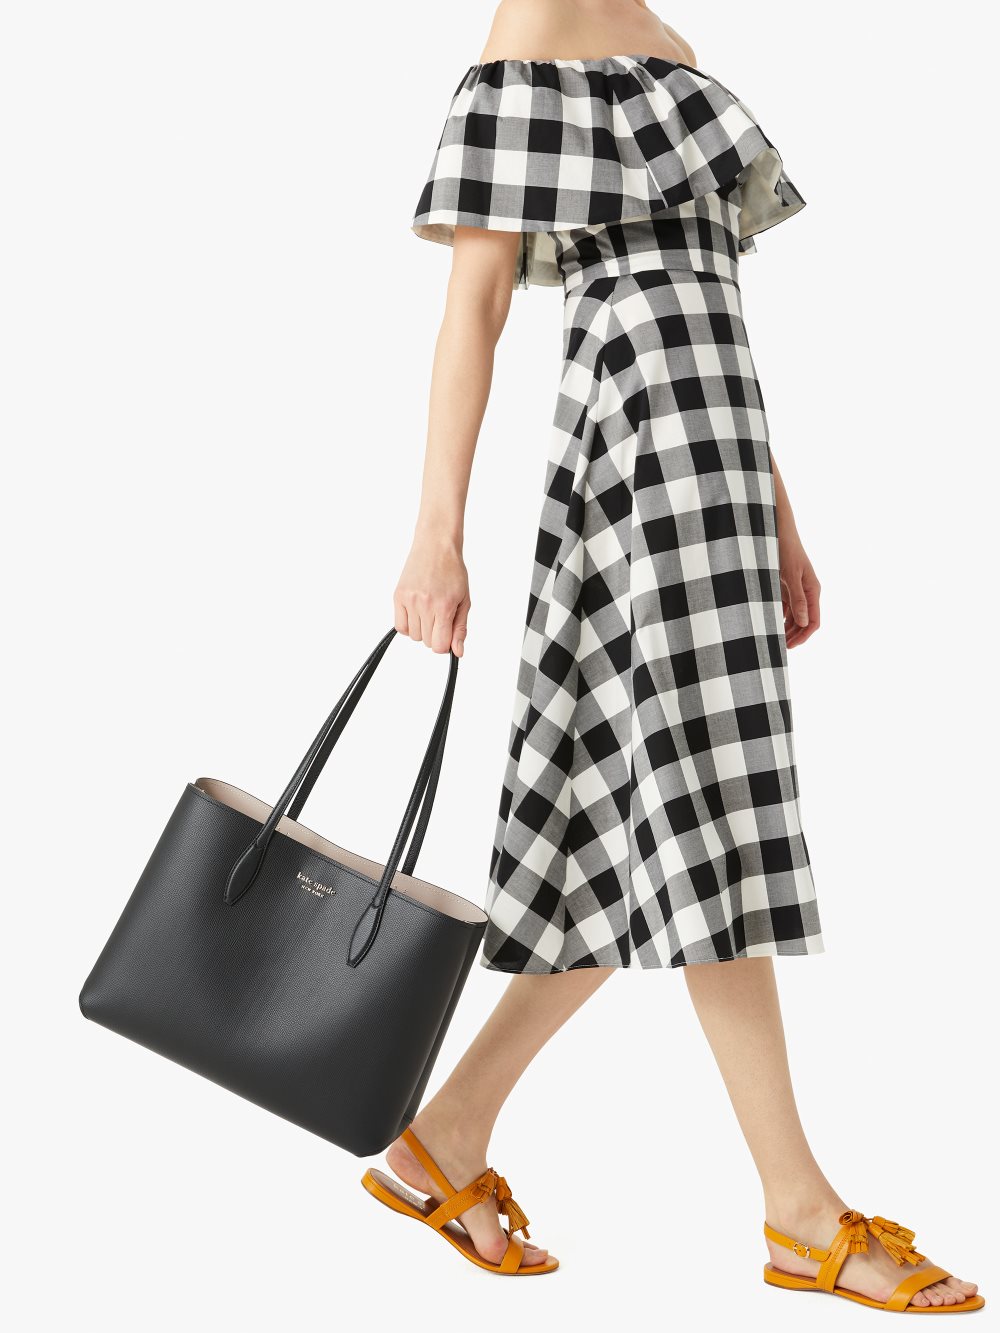 Women's black/black all day large tote | Kate Spade